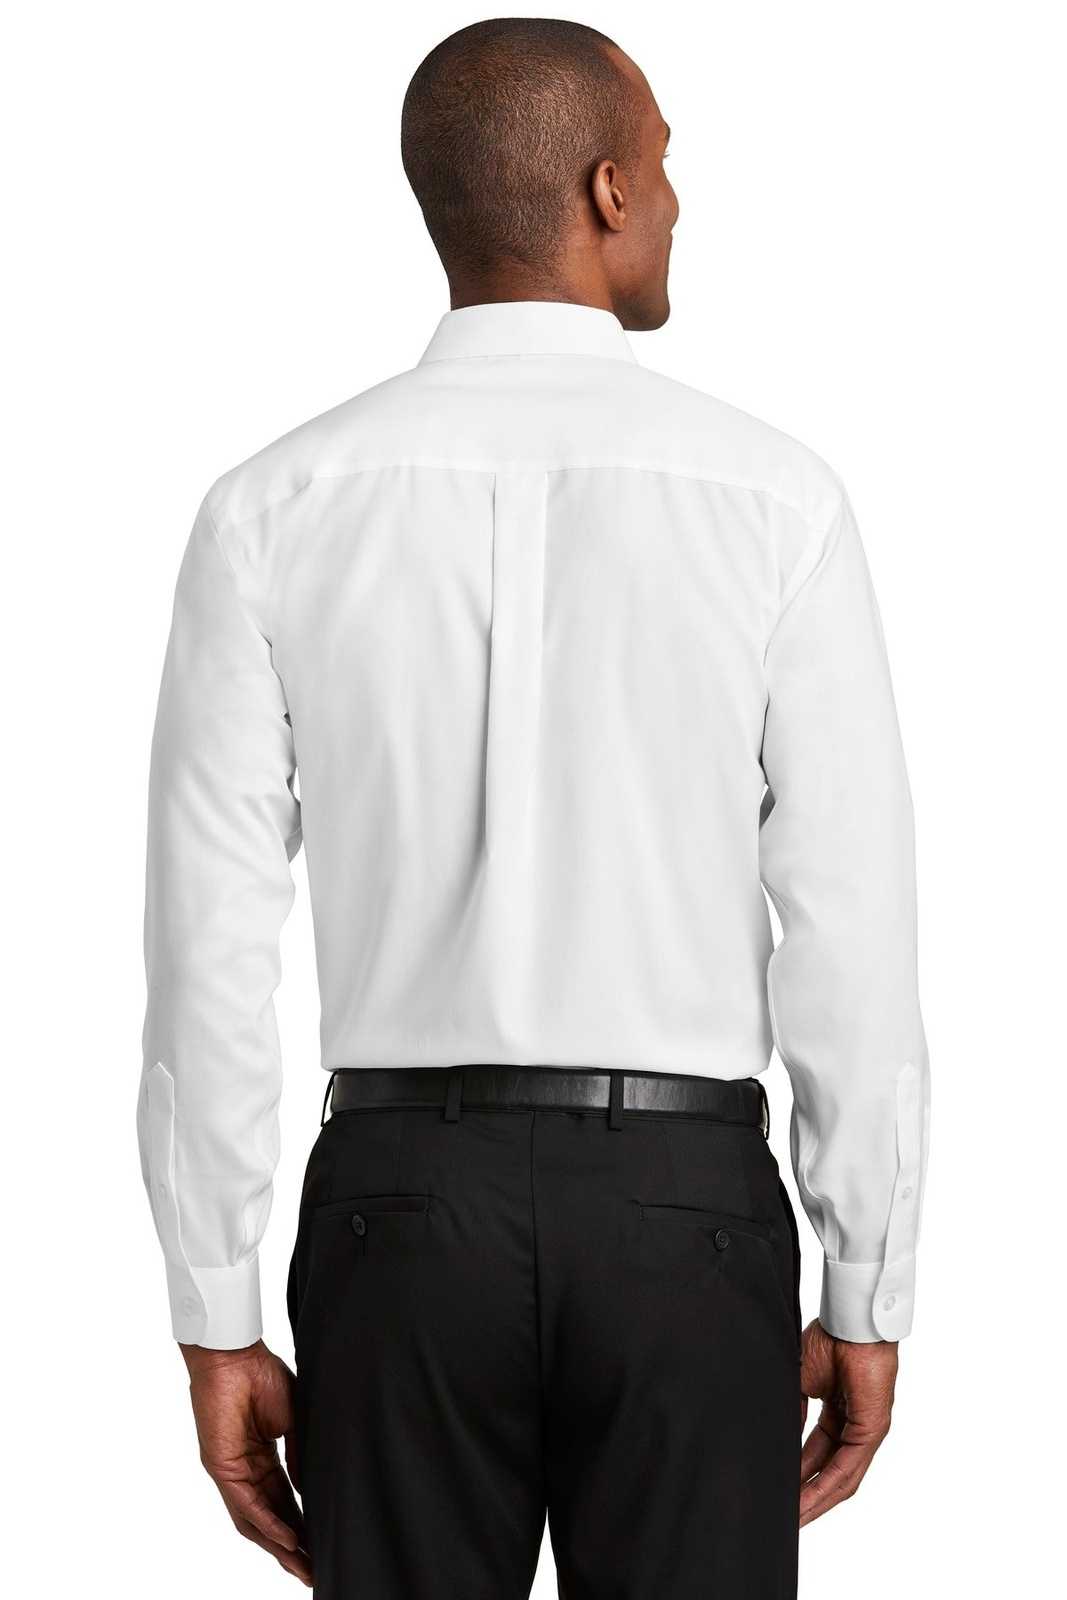 Red House RH240 Pinpoint Oxford Non-Iron Shirt - White - HIT a Double - 2